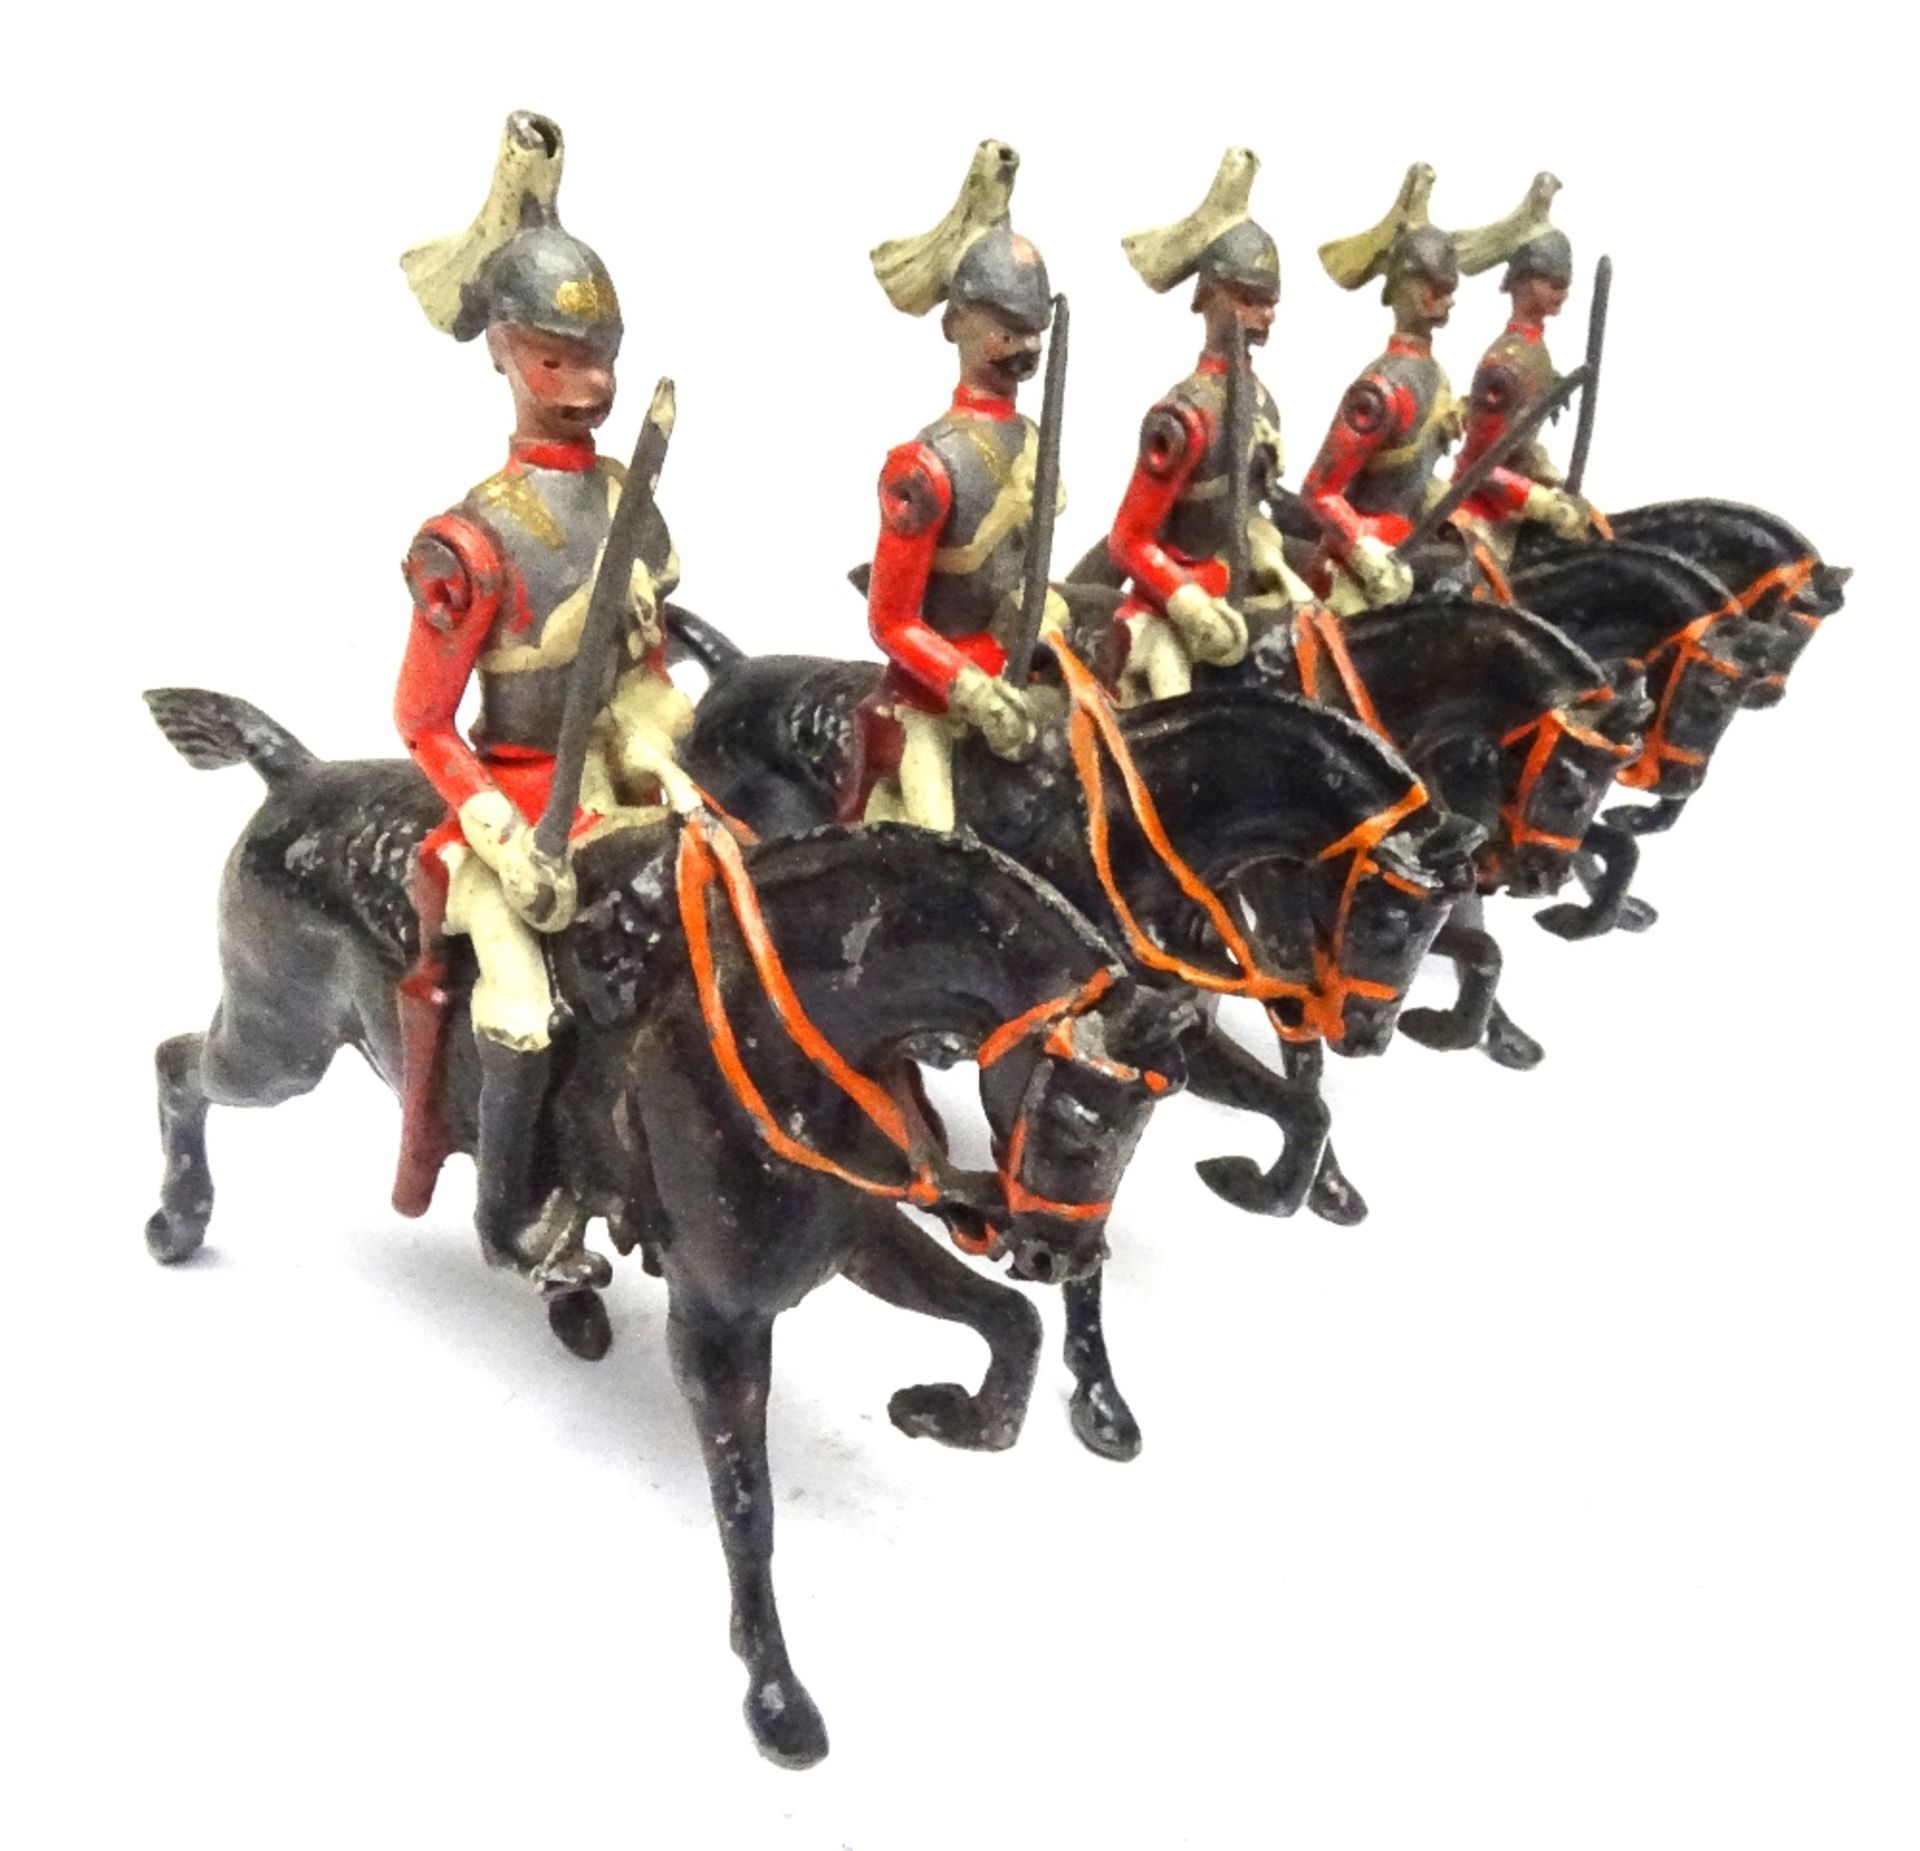 Britains from set 1, First Life Guards - Image 4 of 4